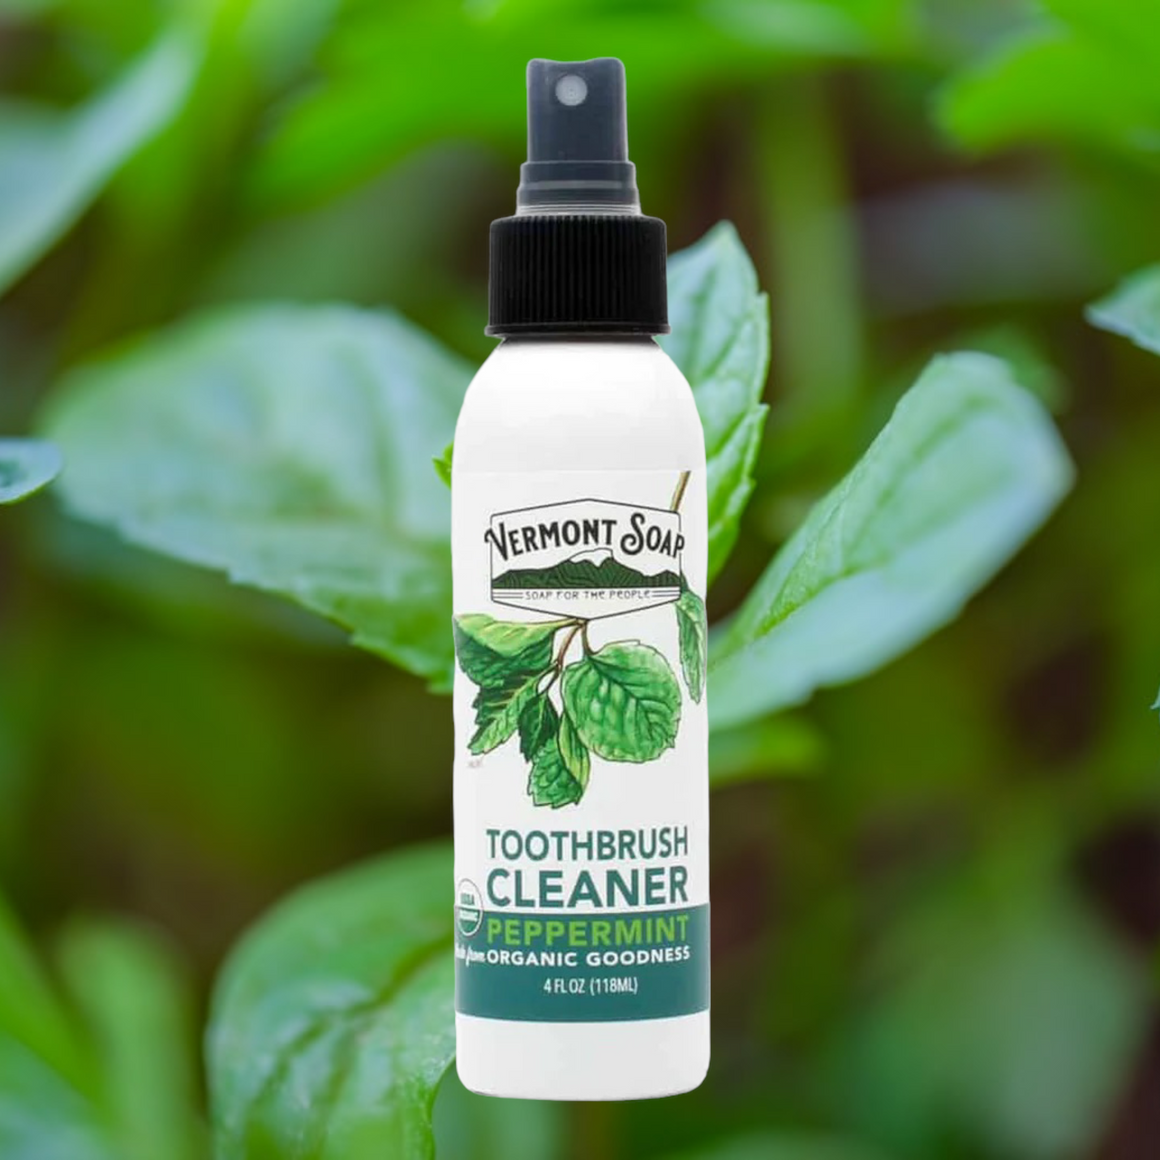 Toothbrush Cleaner  118ml Spray - Peppermint Vermont Soap